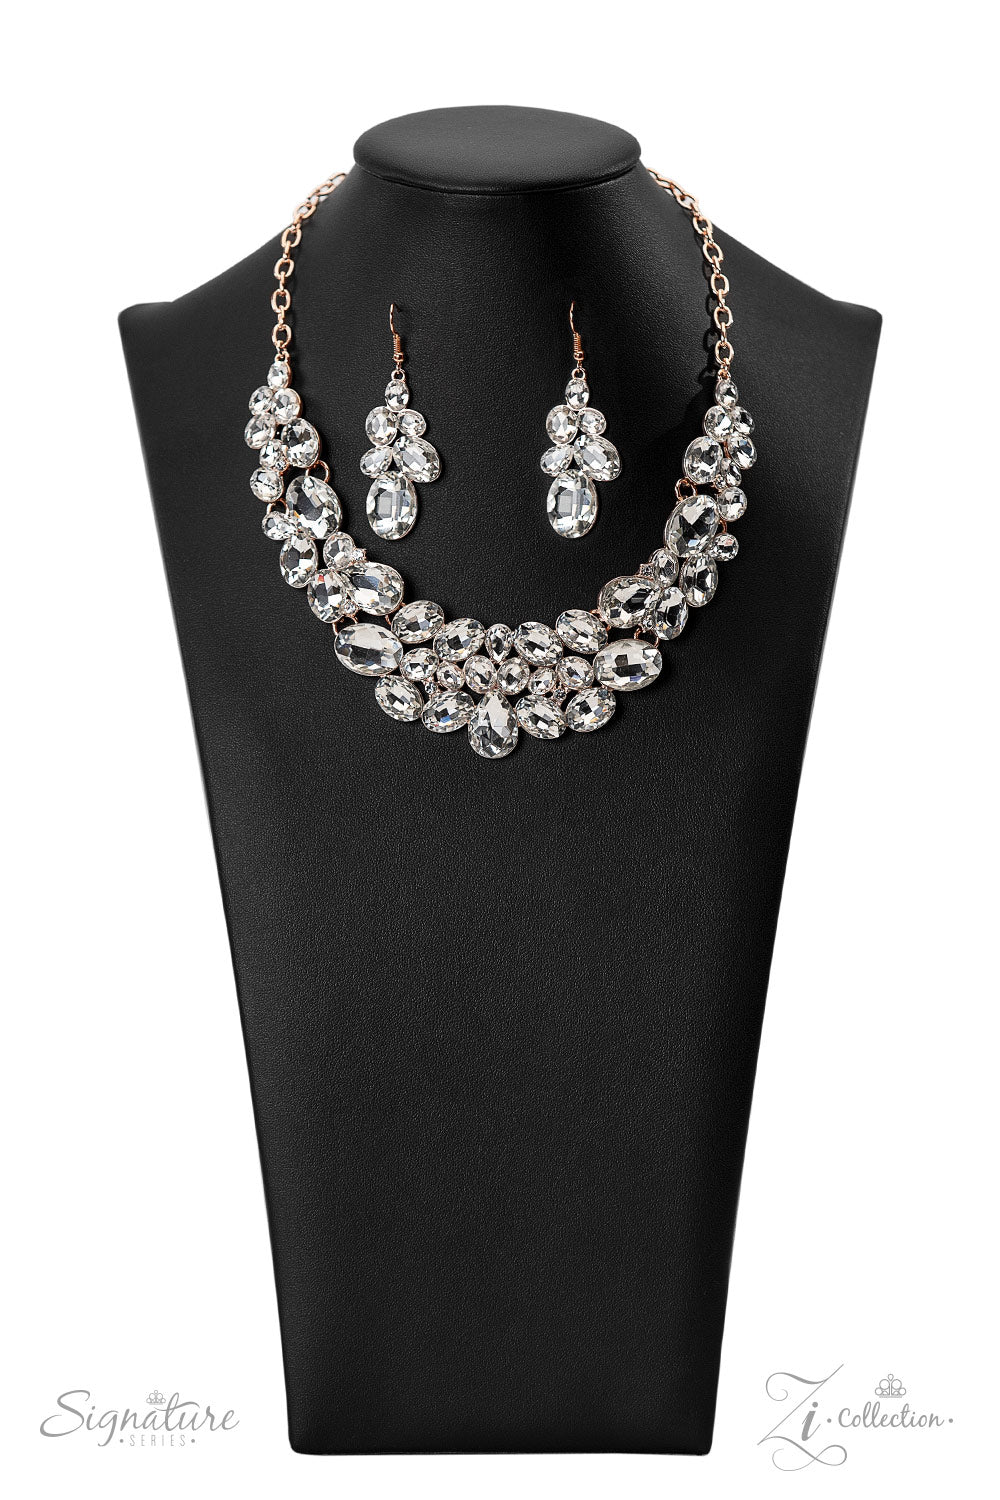 The Jenni 2022 Zi Collection Necklace - Paparazzi Accessories  Oversized white rhinestones with exaggerated faceted surfaces gather into glittery clusters along the collar. A teardrop-shaped gem sits front-and-center, inviting the eye to explore the scattered shapes throughout the design. Refined sparkle radiates from every angle, as the rose gold finish of the chain and fittings emit a cozy glow. Features an adjustable clasp closure.  Sold as one individual necklace. Includes one pair of matching earrings.